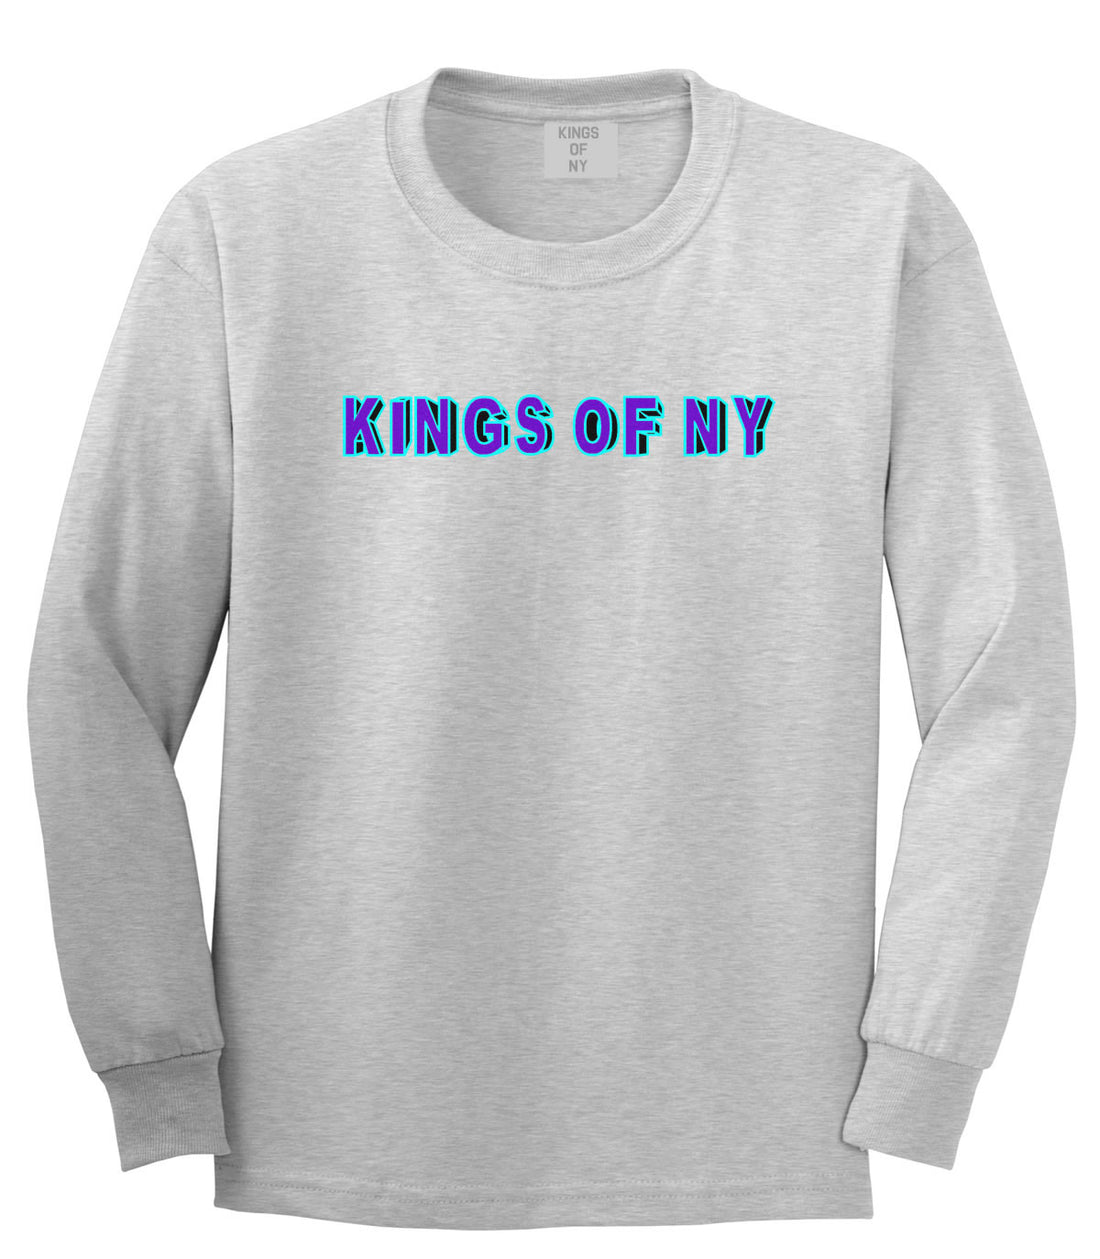 Bright Block Letters Boys Kids Long Sleeve T-Shirt in Grey by Kings Of NY